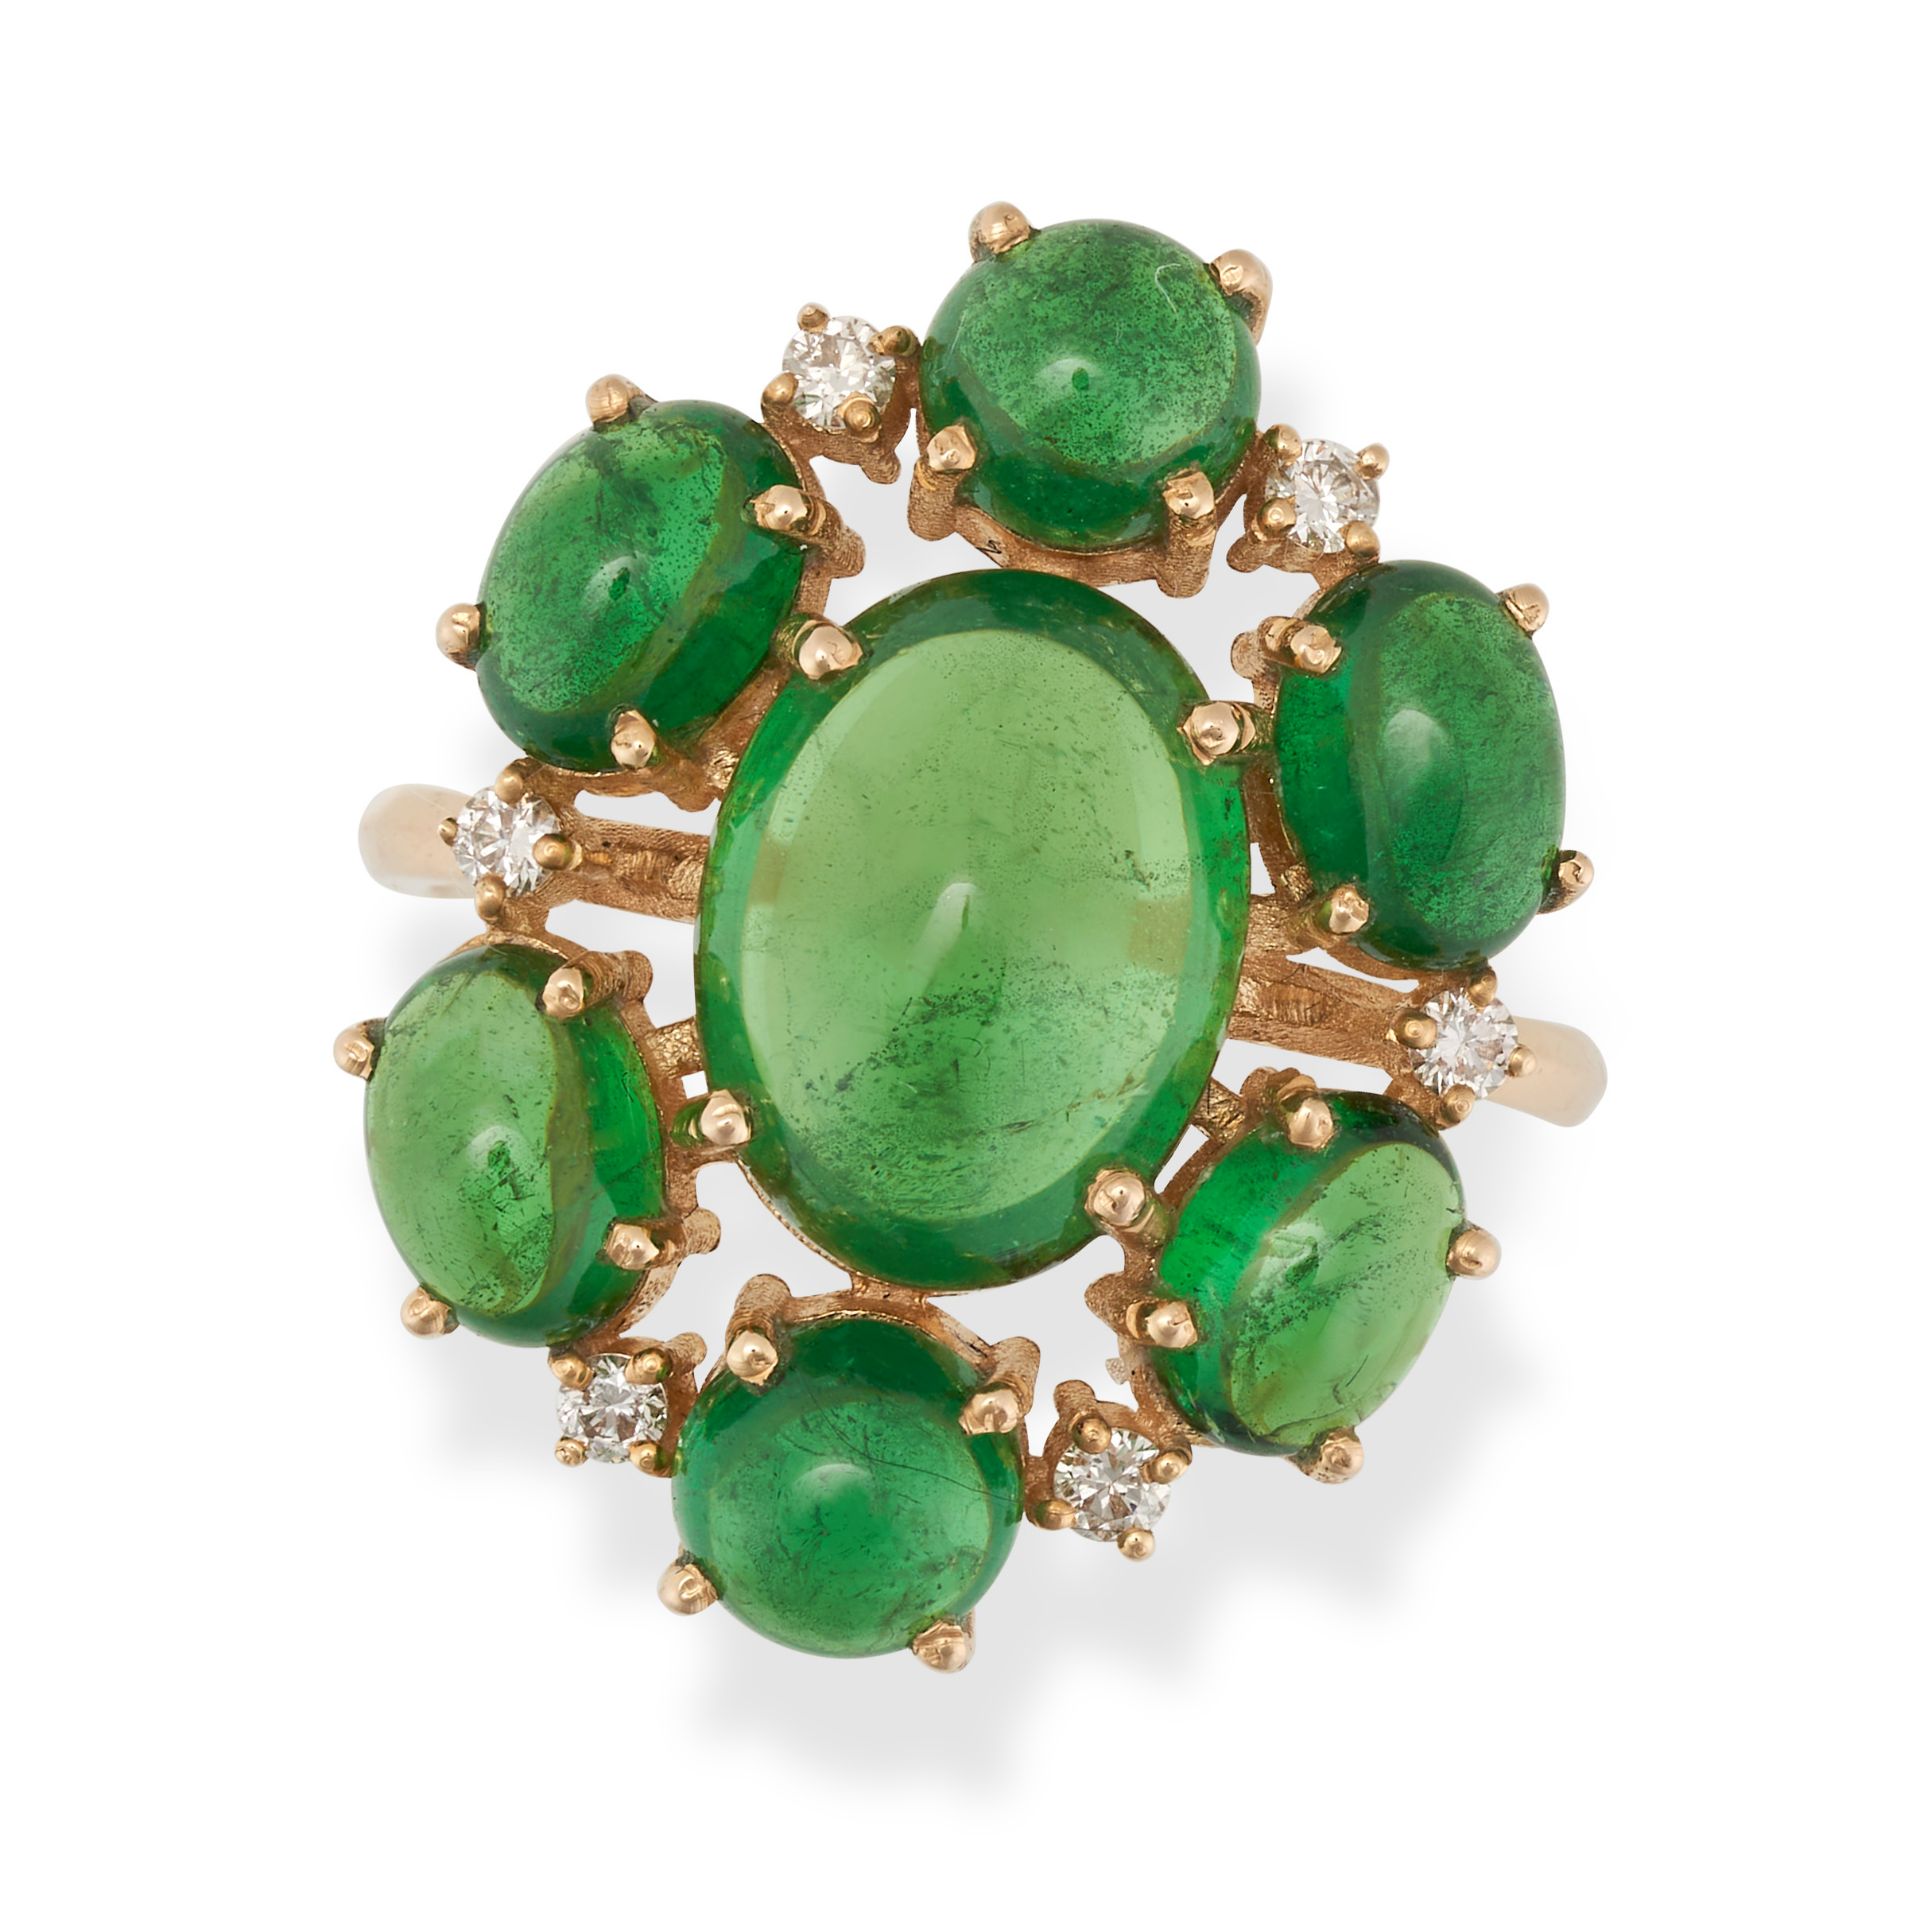 A TSAVORITE GARNET AND DIAMOND RING in yellow gold, set with a cluster of cabochon tsavorite garn...